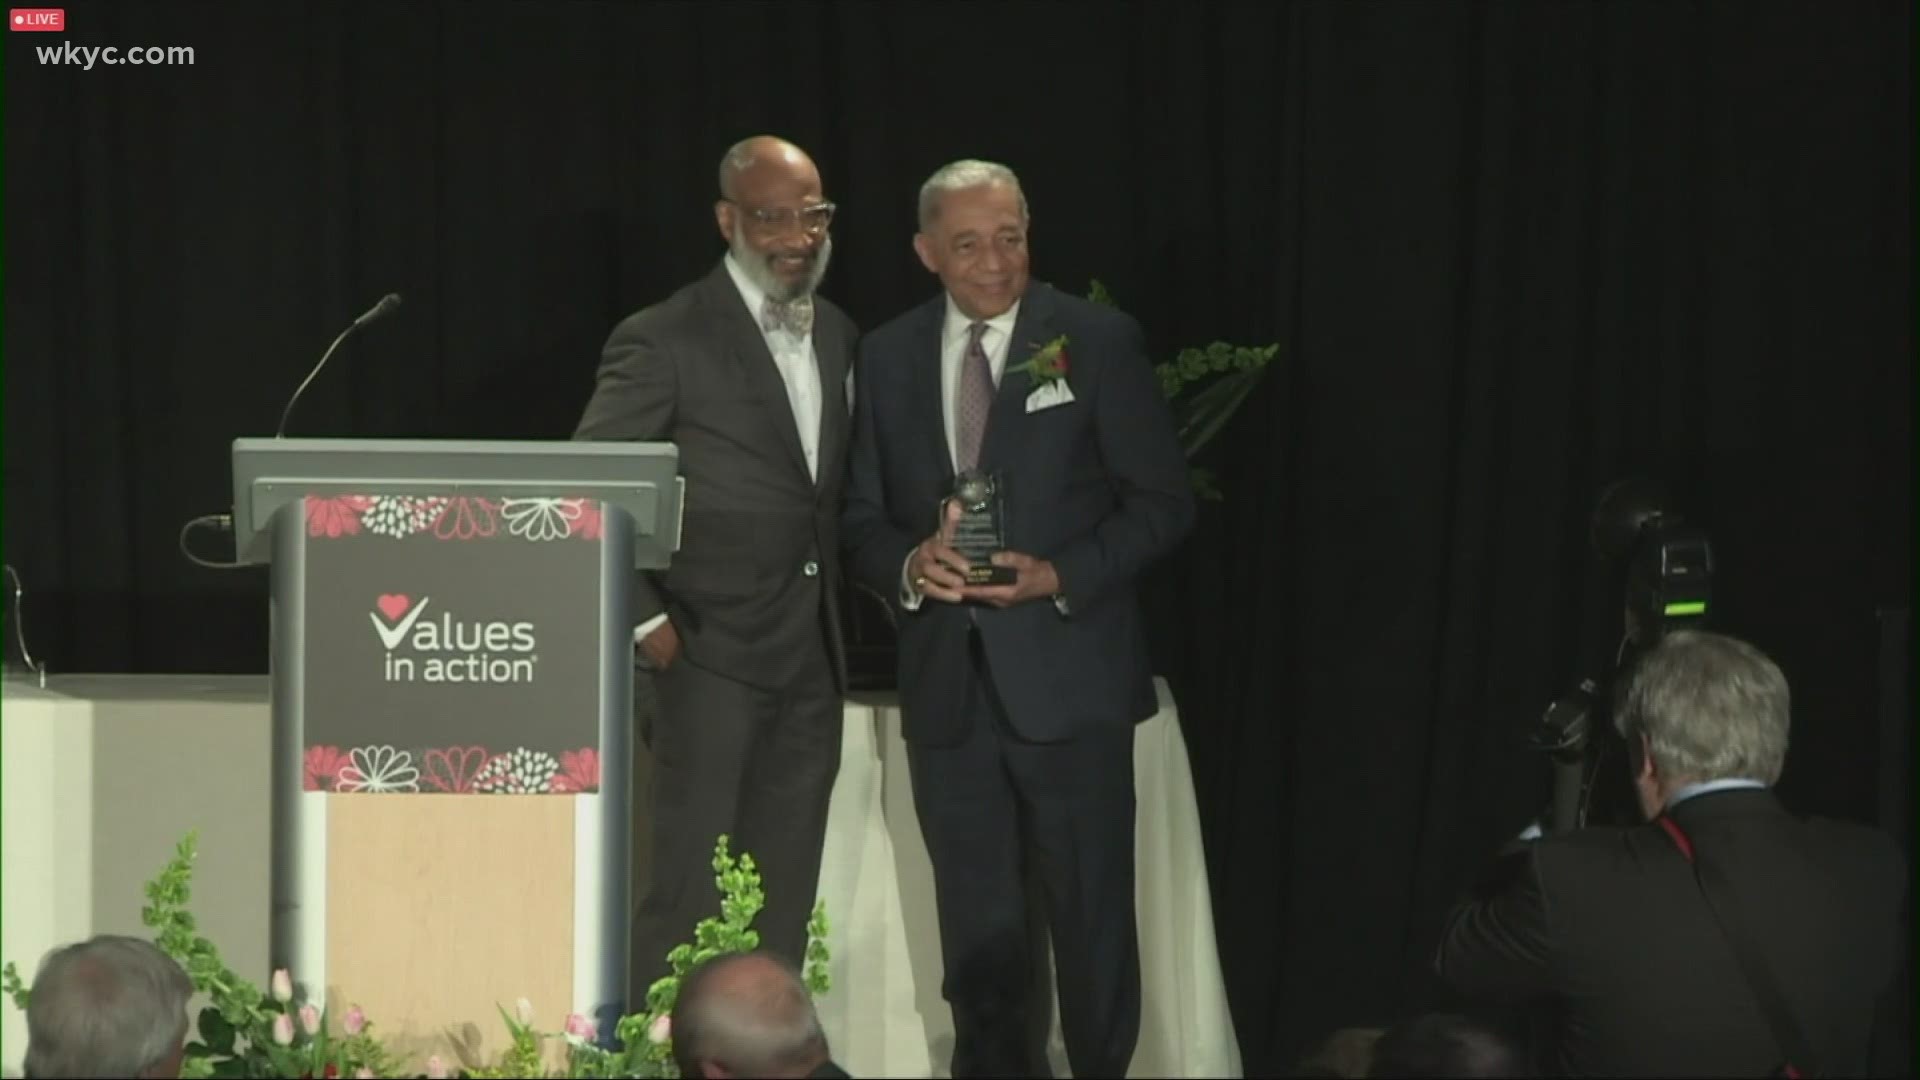 Leon Bibb received The Alan R. Schonberg Community Rescuer Award, which recognizes  “unsung” heroes in our community.